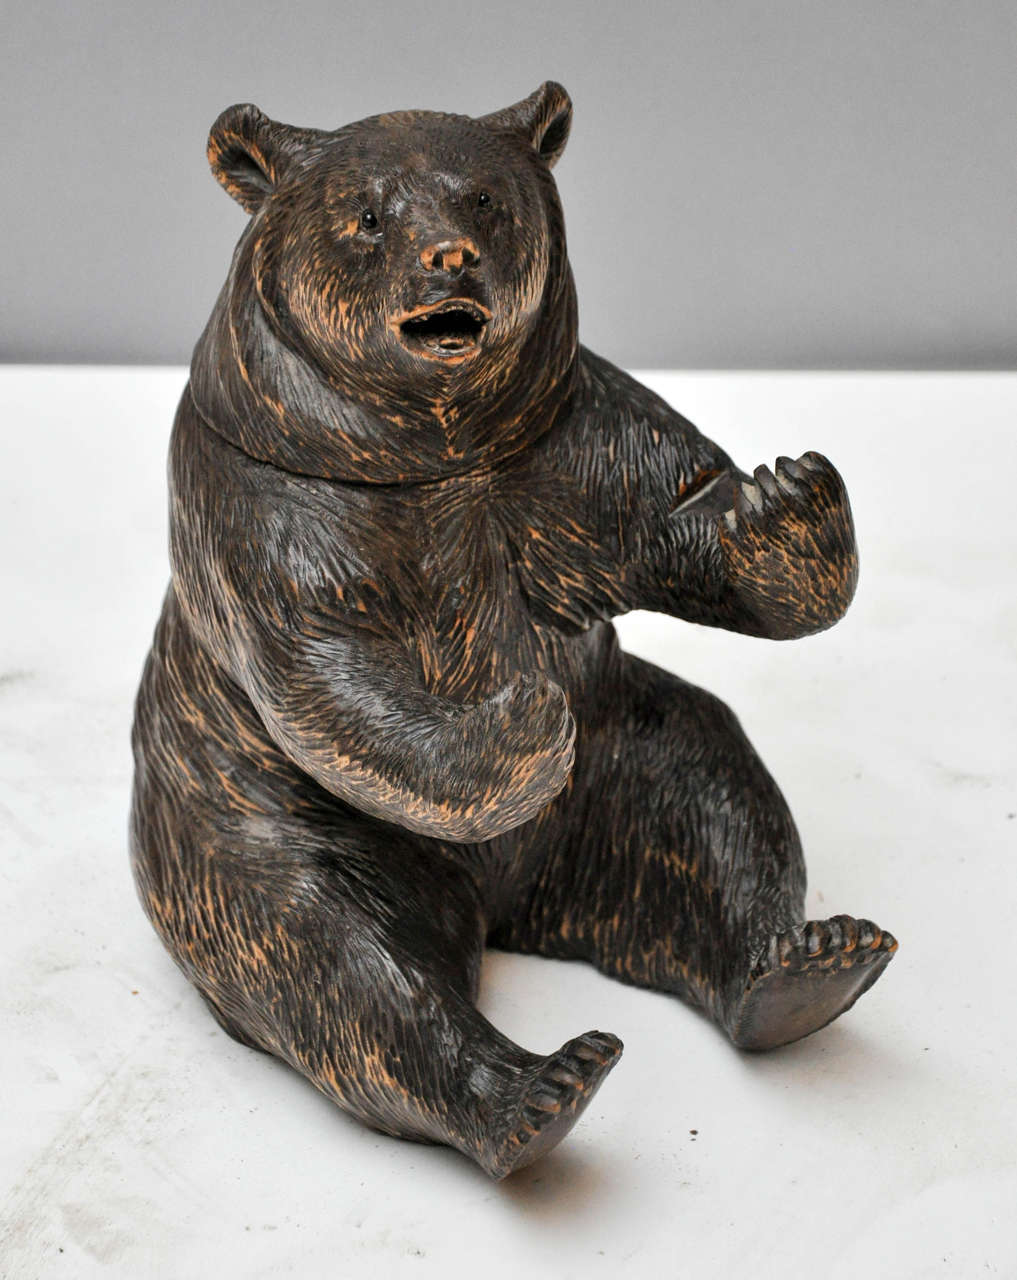 19th century Black Forest bear humidor. Intricately hand-carved sitting bear, hinged head reveals storage for tobacco, glass eyes and outstretched arms give life-like feel.